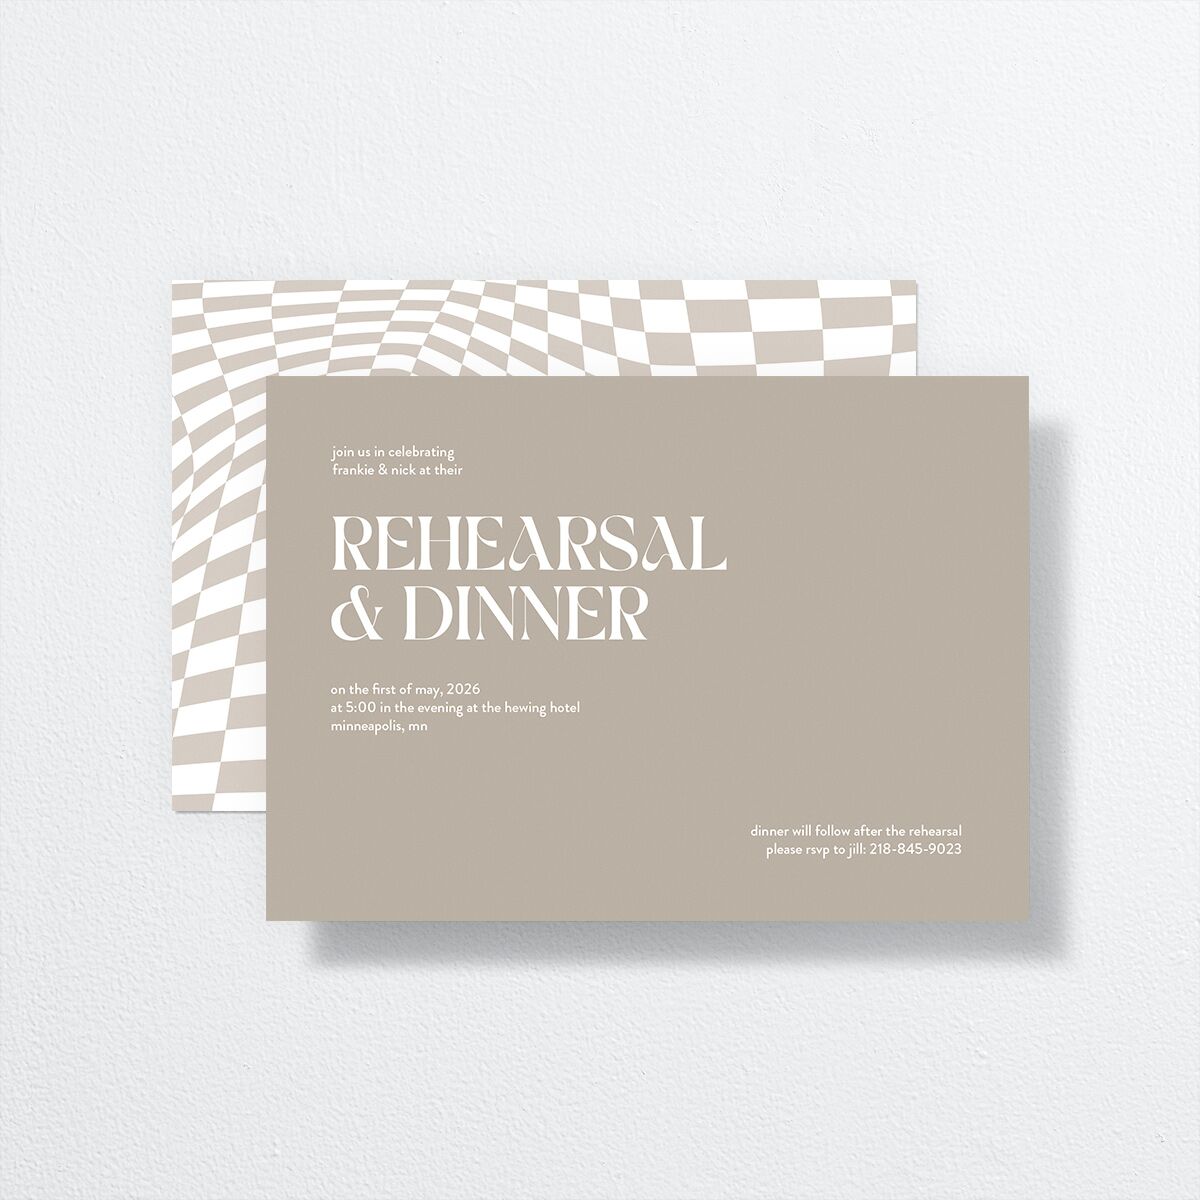 Checked Rehearsal Dinner Invitations front-and-back in cream